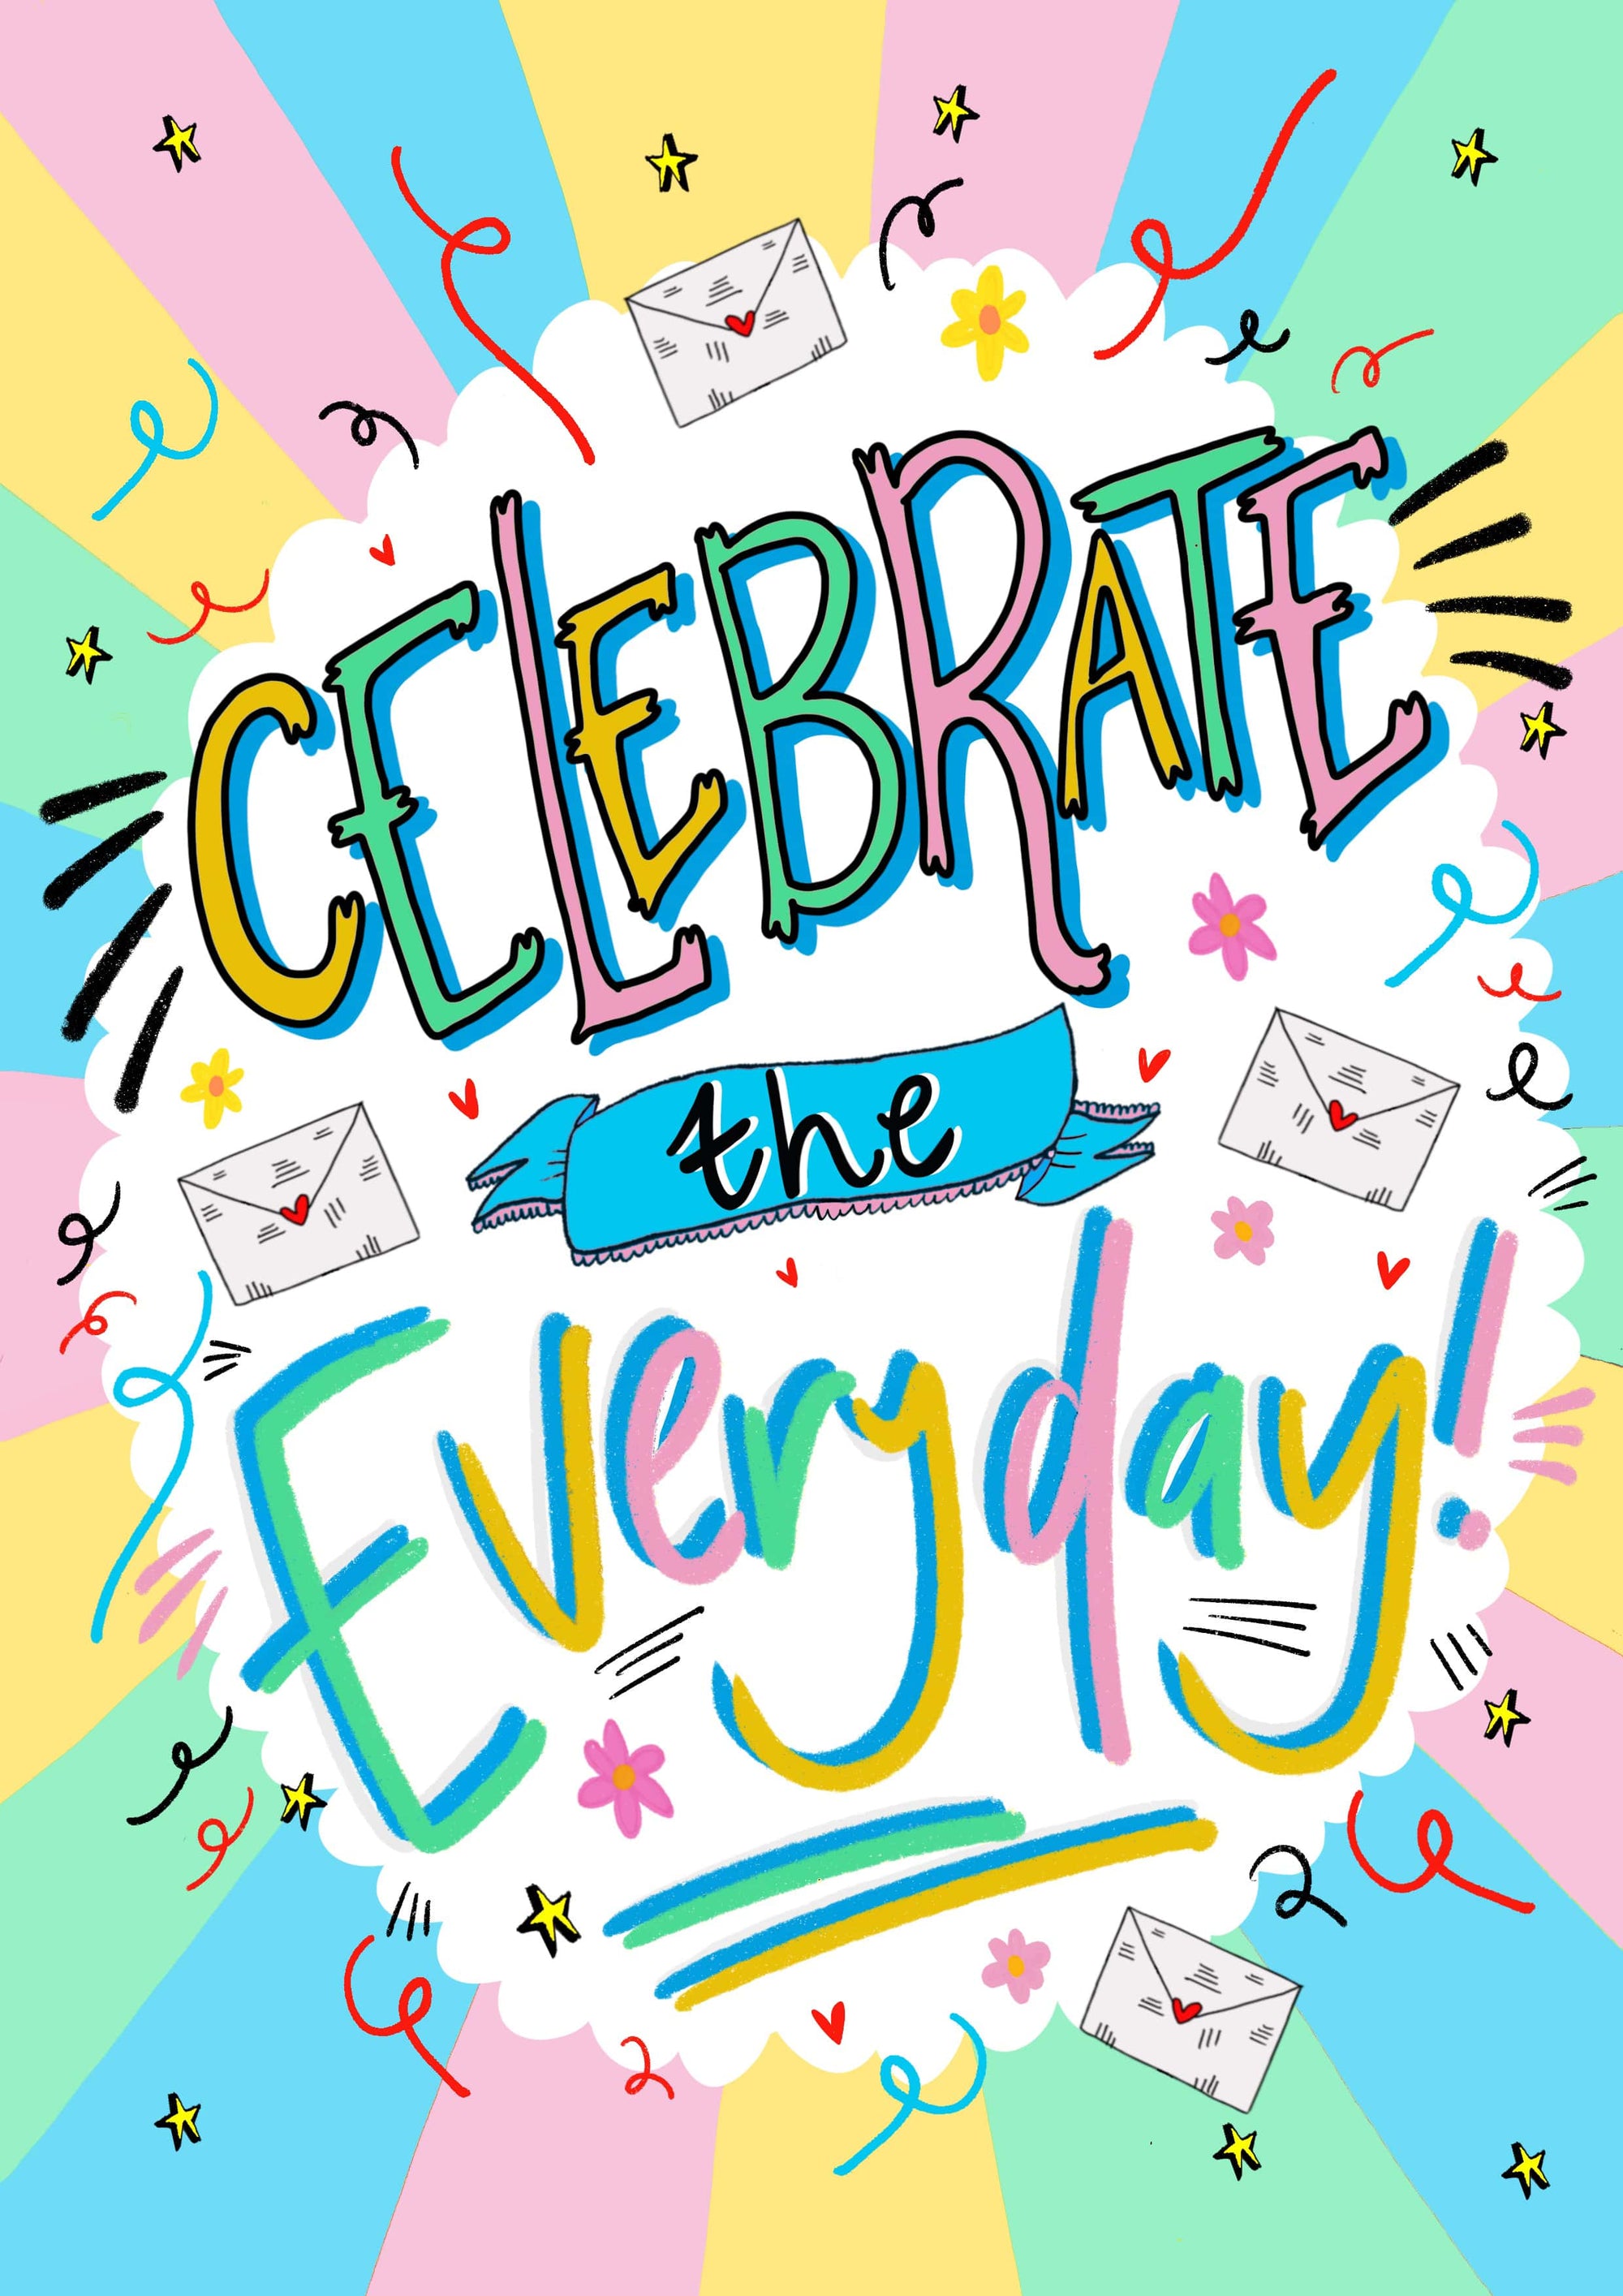 Celebrate the Everyday with cards and gifts from Penny Black